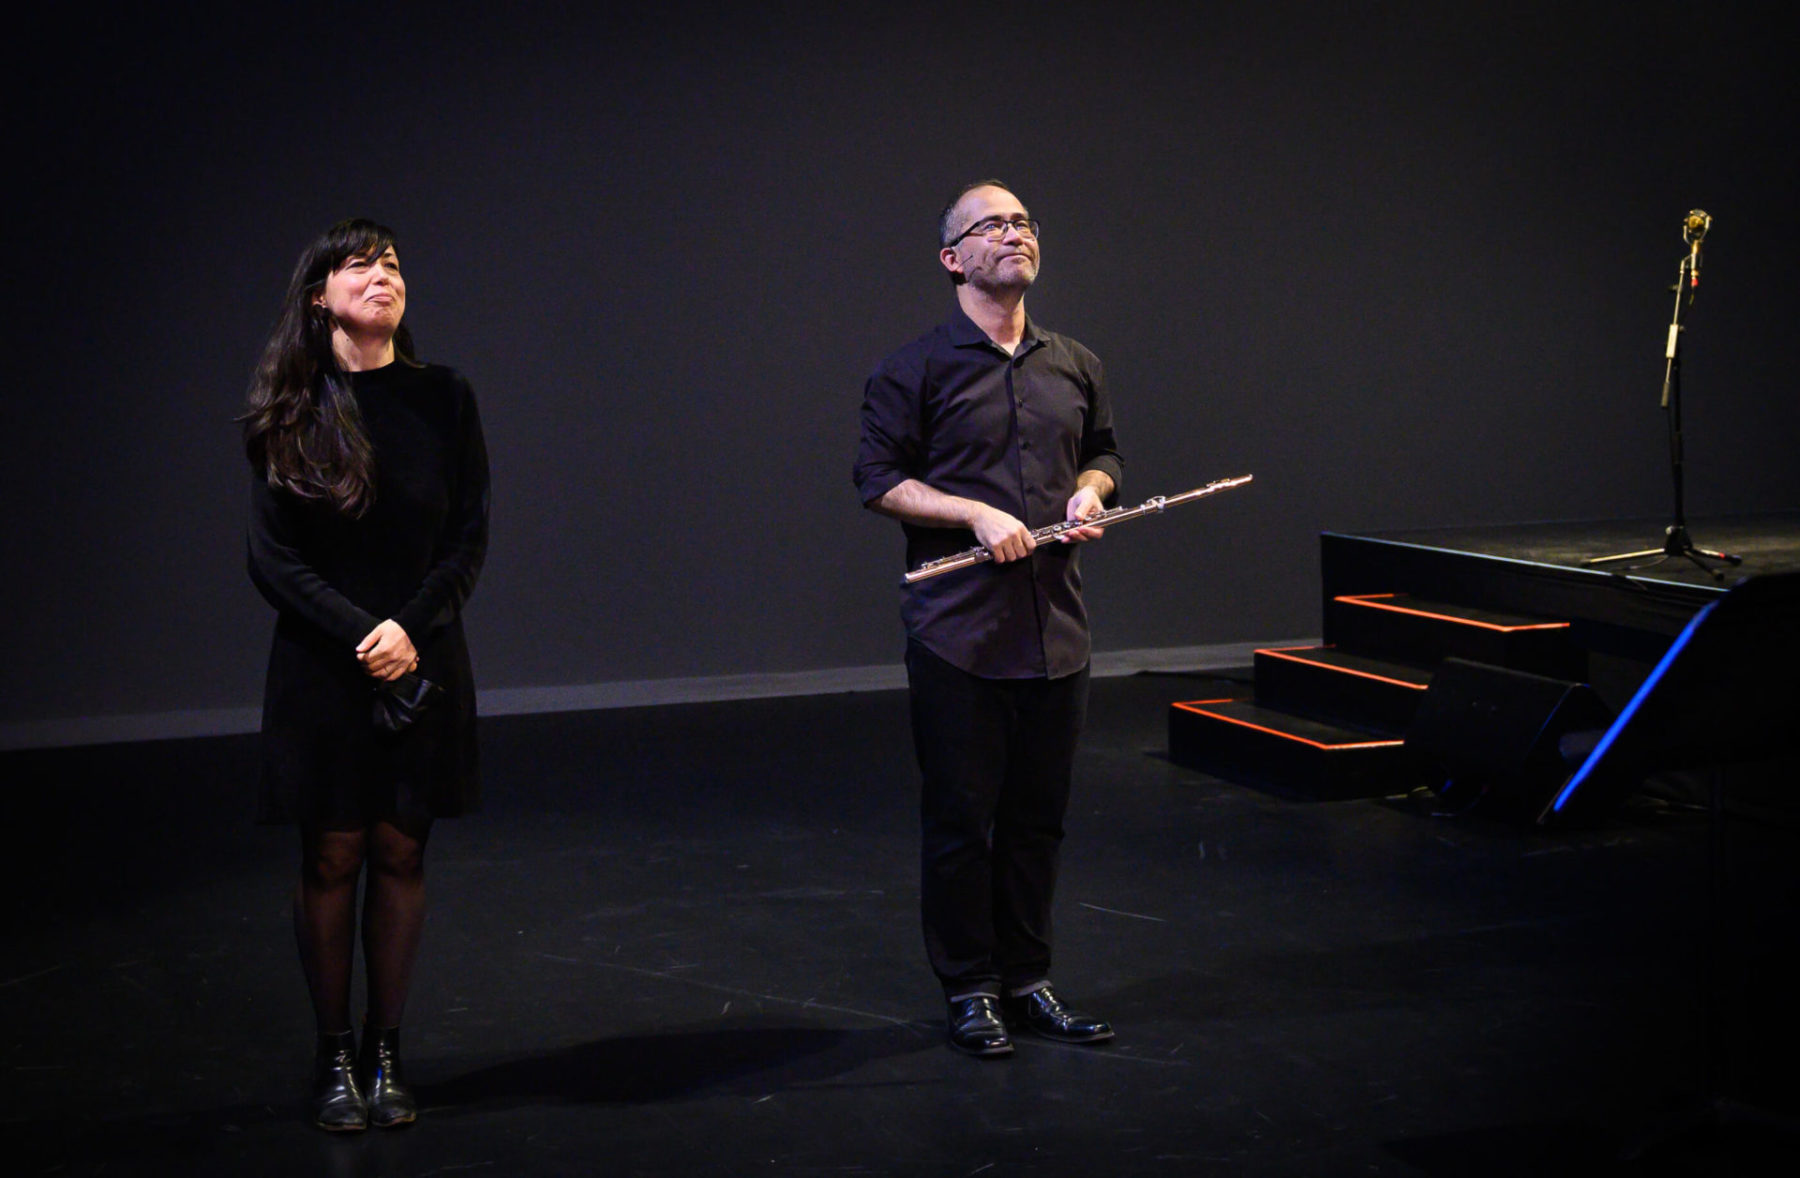 Mark Takeshi McGregor and Keiko Devaux standing on stage